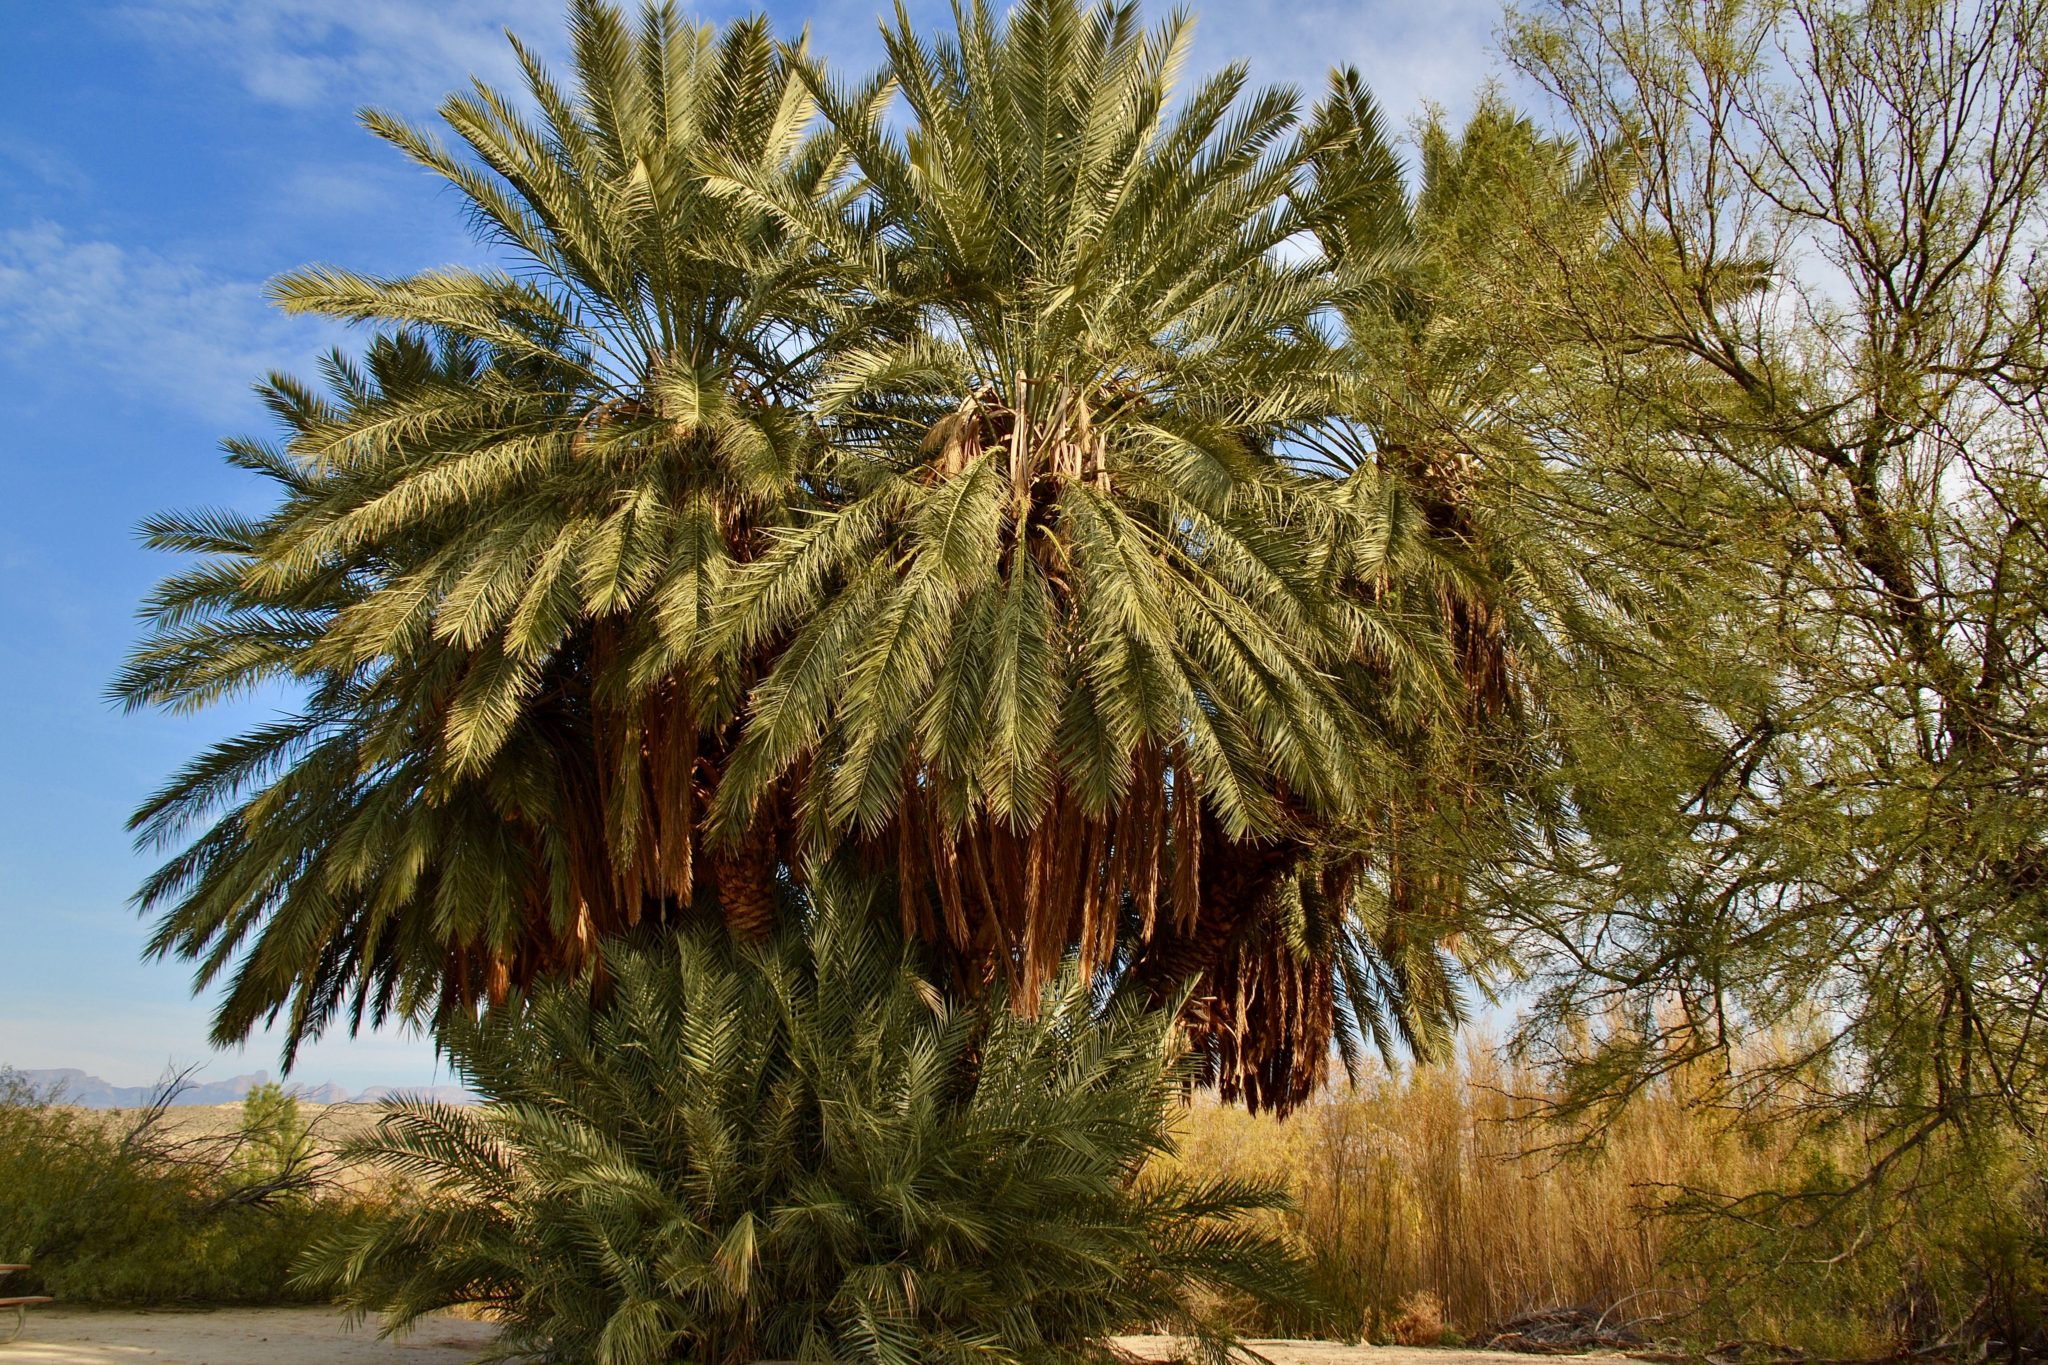 The giant cluster of palm trees on Hot Springs Historic Trail